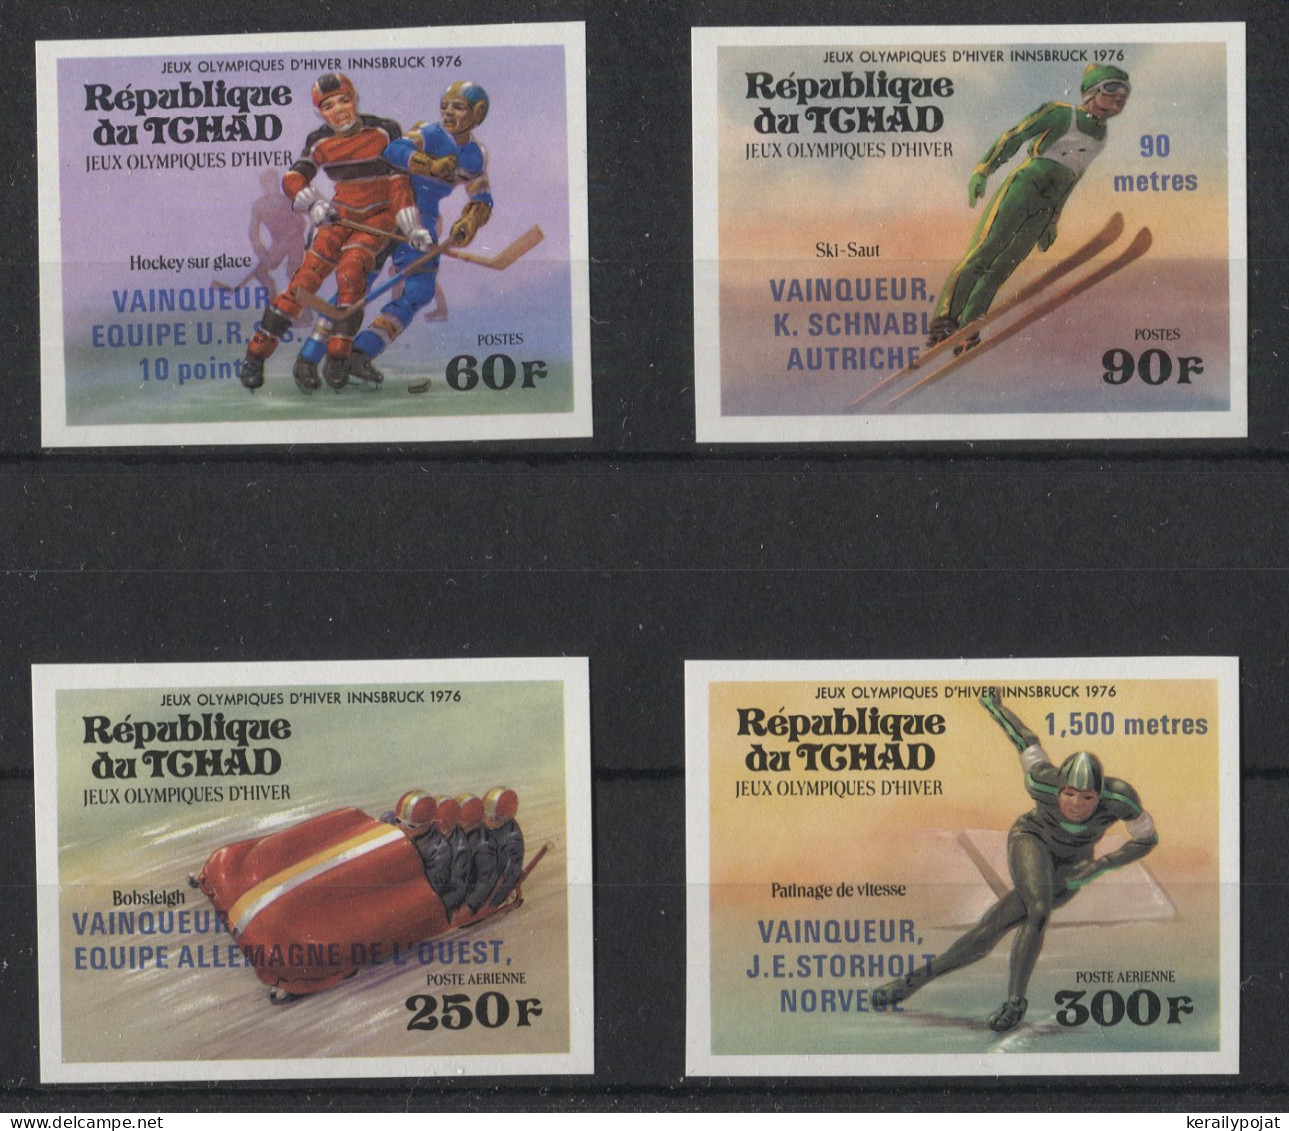 Chad - 1976 Innsbruck Medalist IMPERFORATE MNH__(TH-24192) - Chad (1960-...)